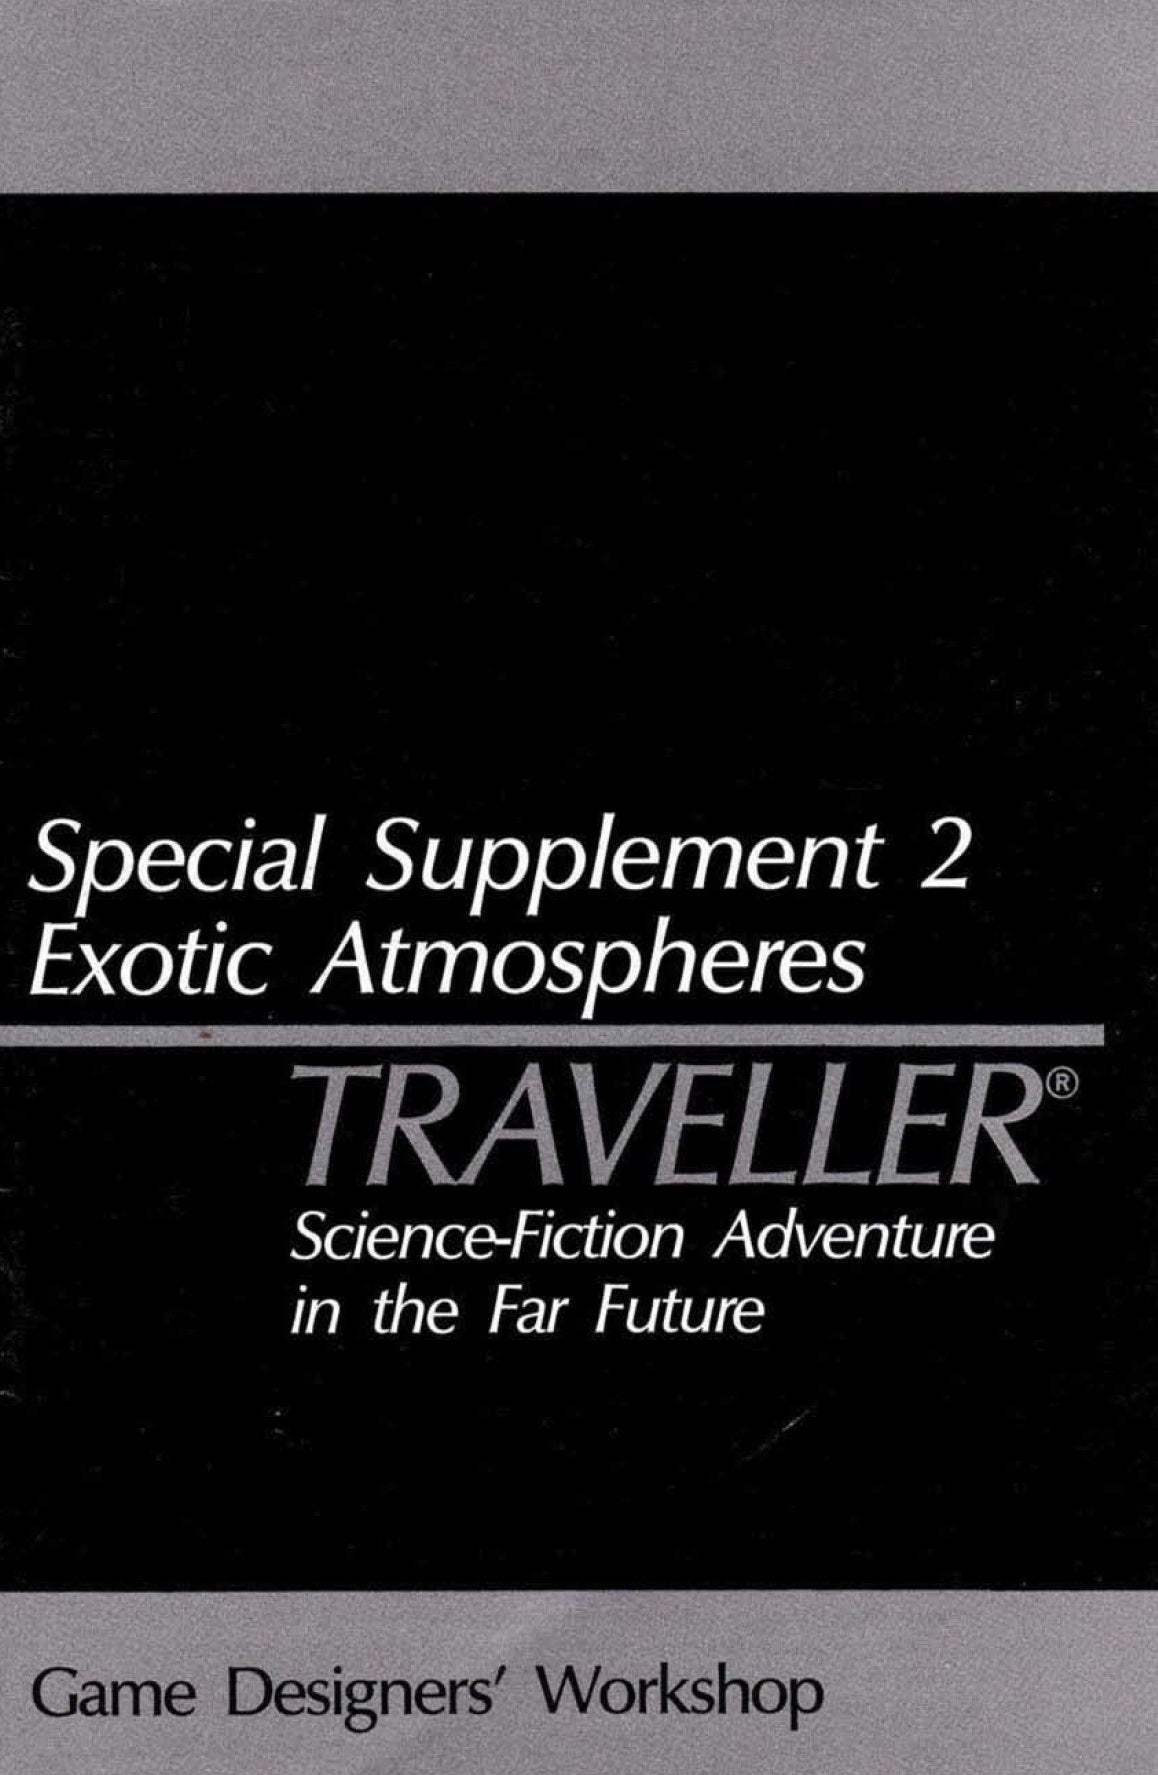 Special Supplement 2: Exotic Atmospheres ebook